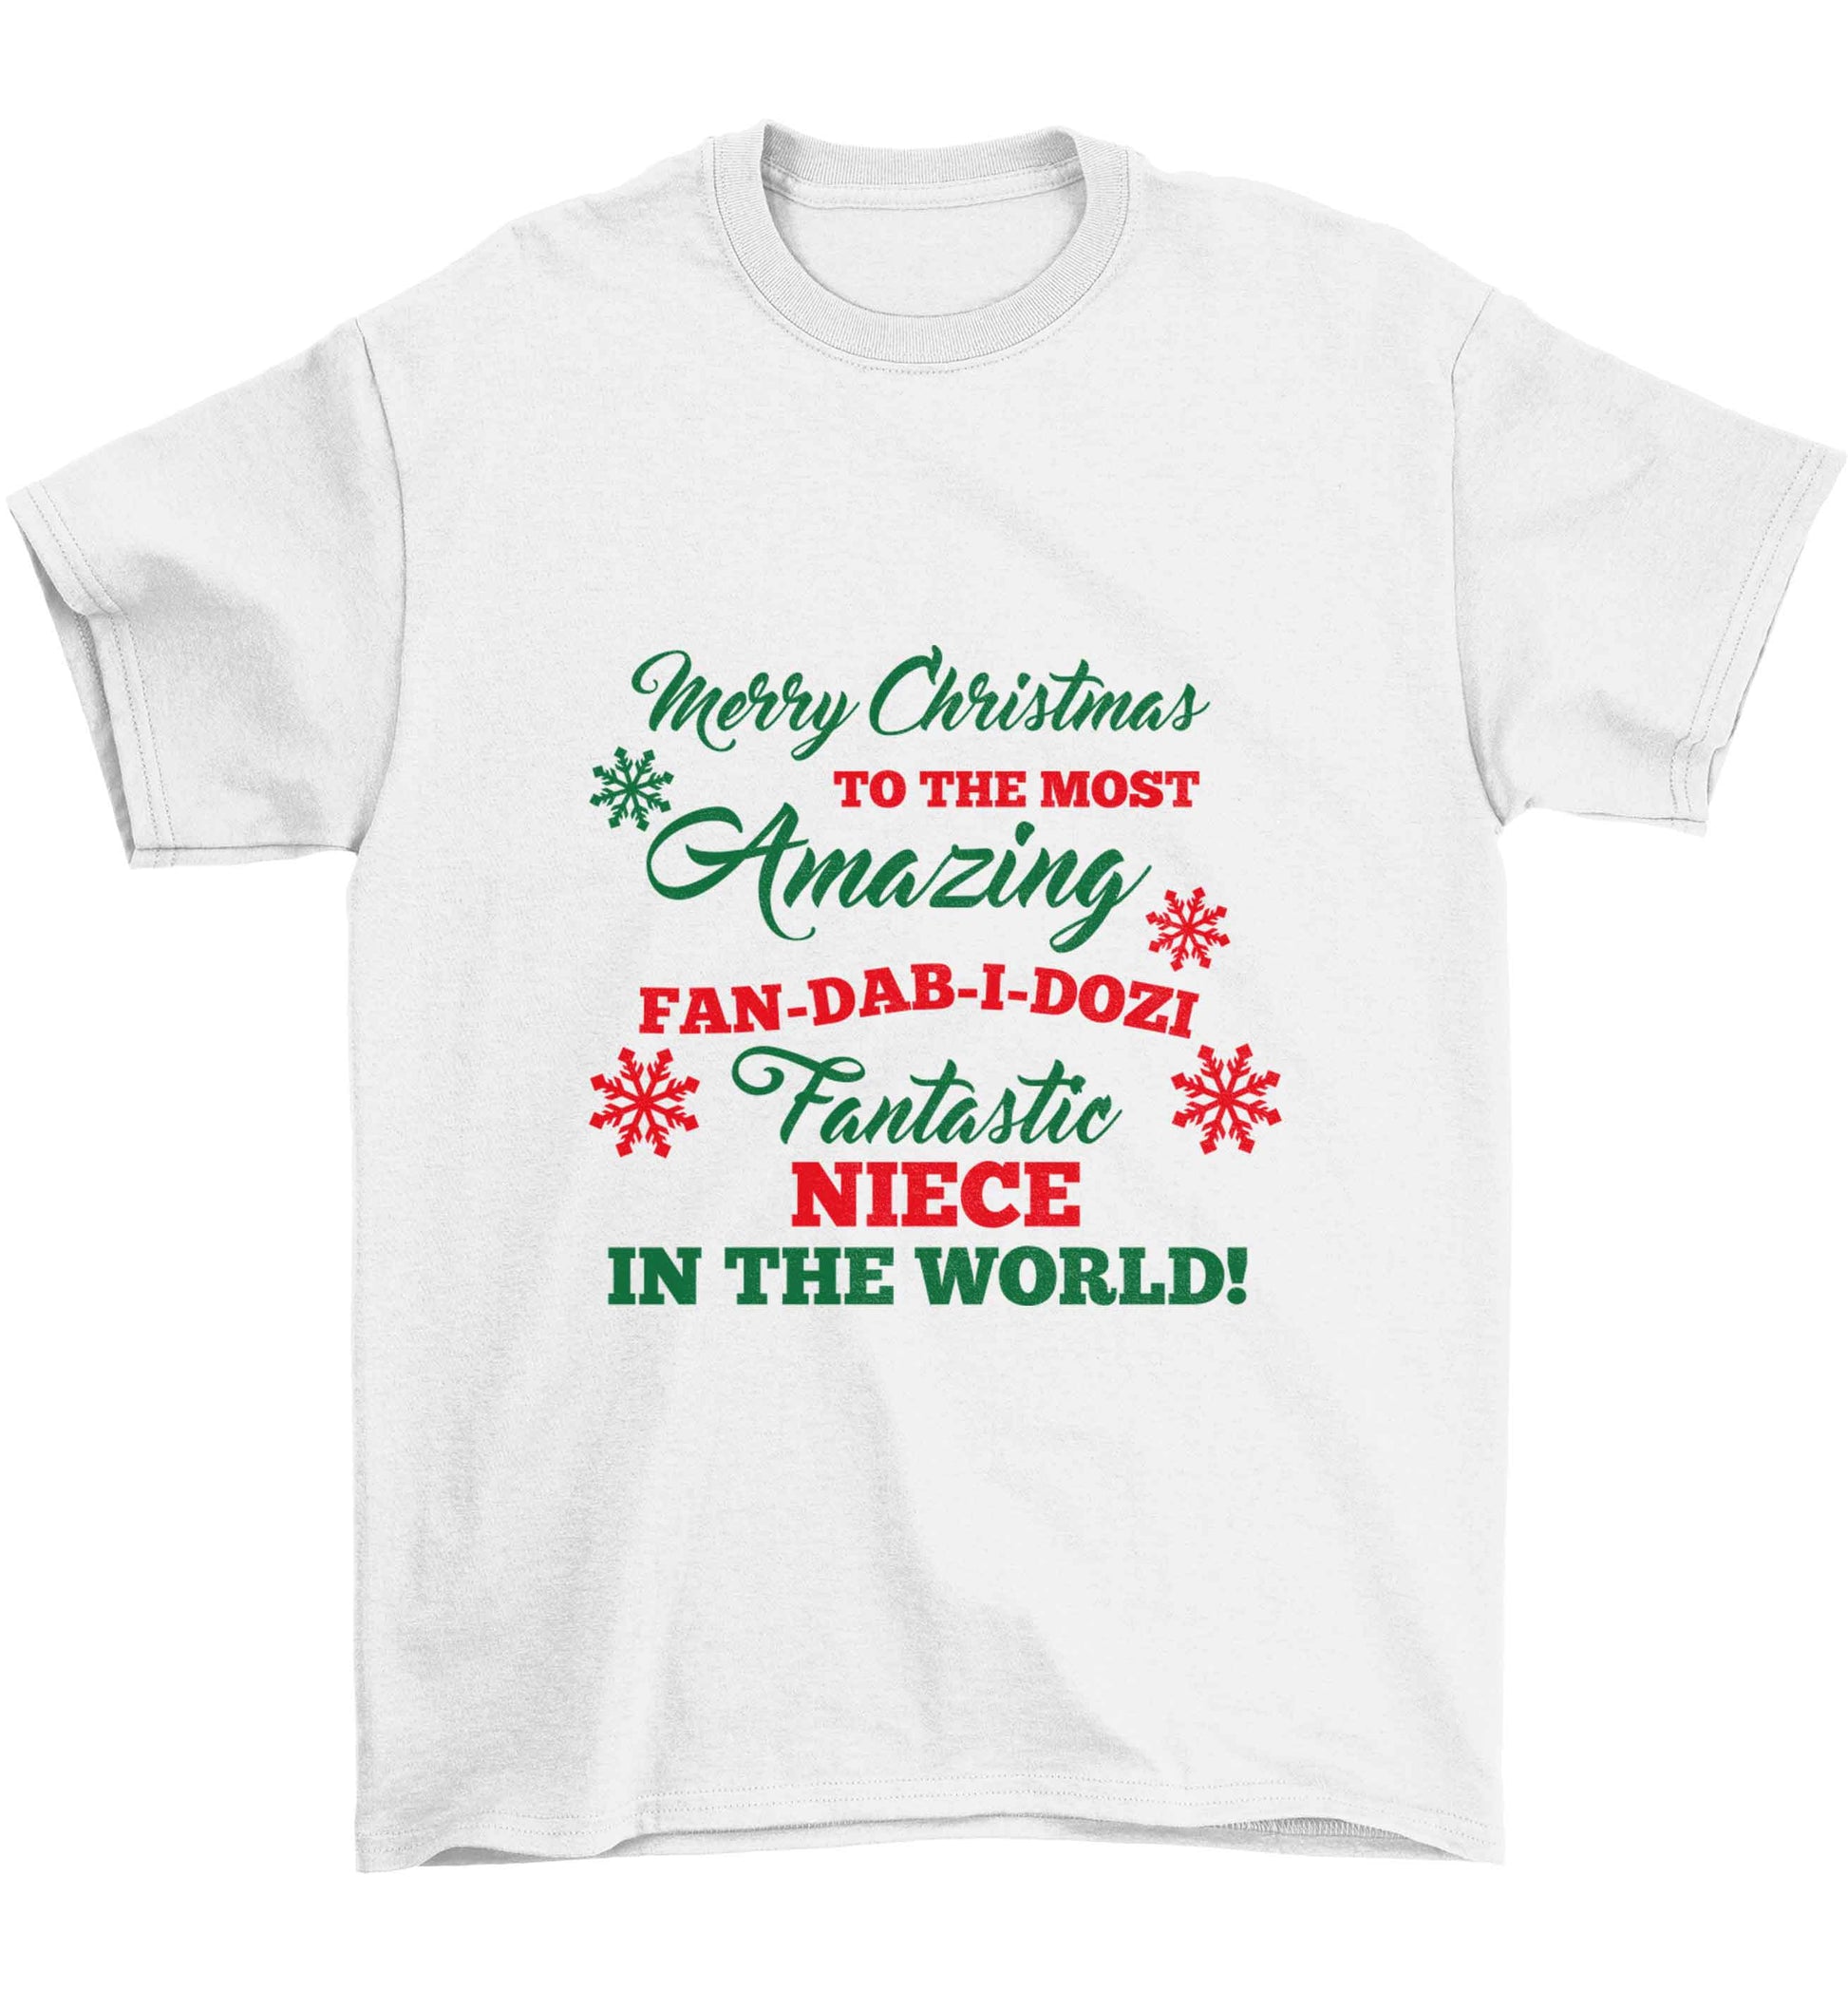 Merry Christmas to the most amazing fan-dab-i-dozi fantasic Niece in the world Children's white Tshirt 12-13 Years